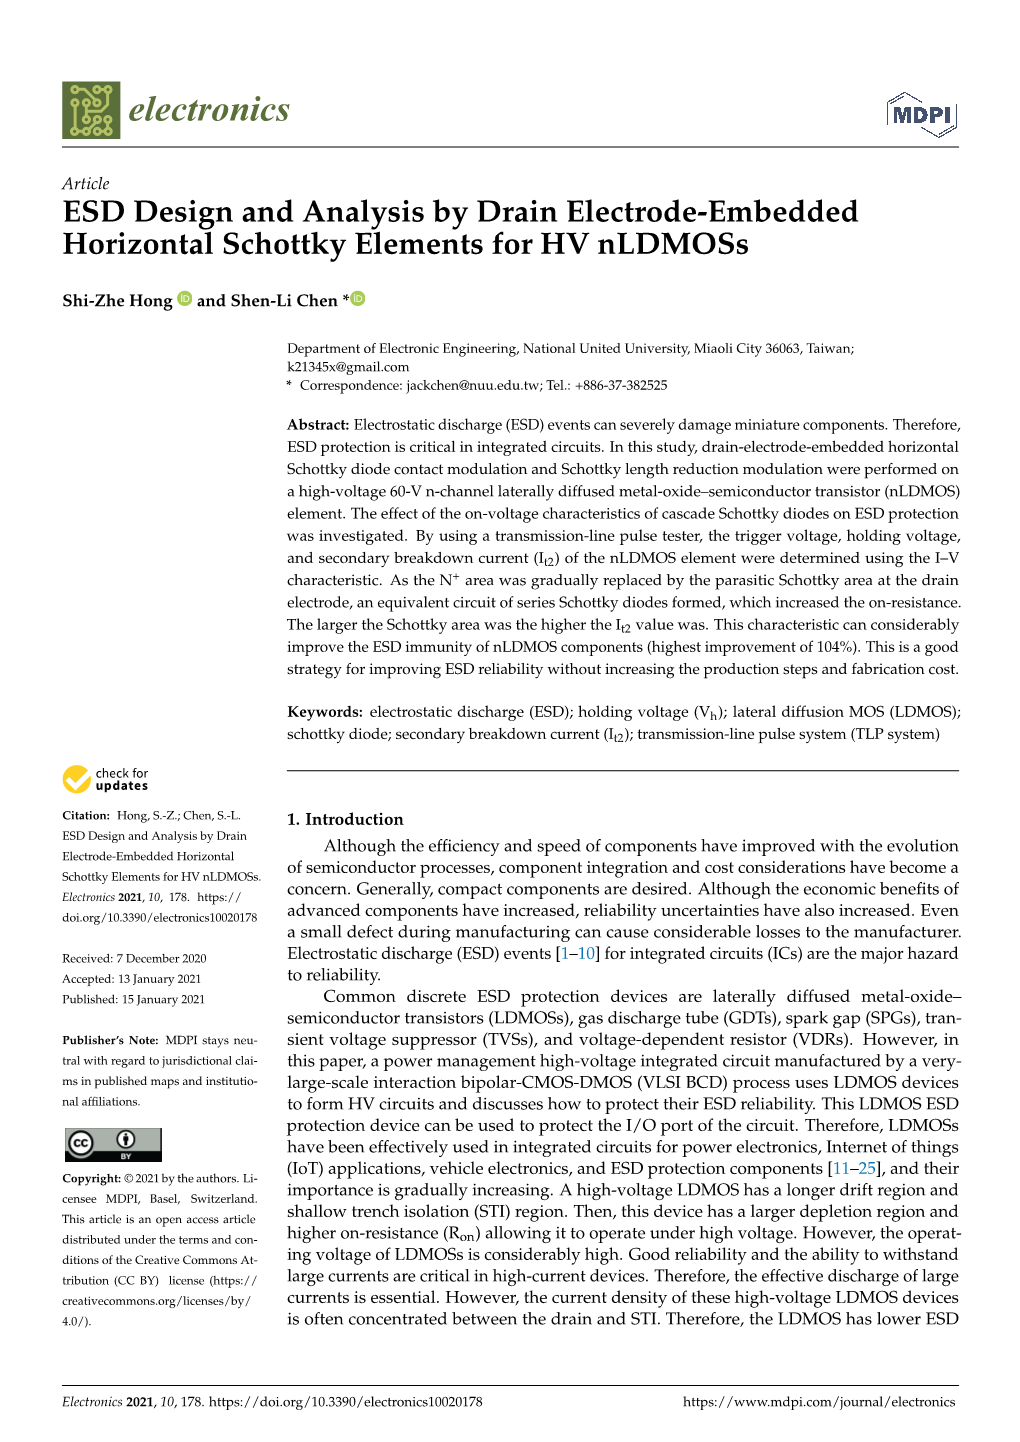 ESD Design and Analysis by Drain Electrode-Embedded Horizontal Schottky Elements for HV Nldmoss